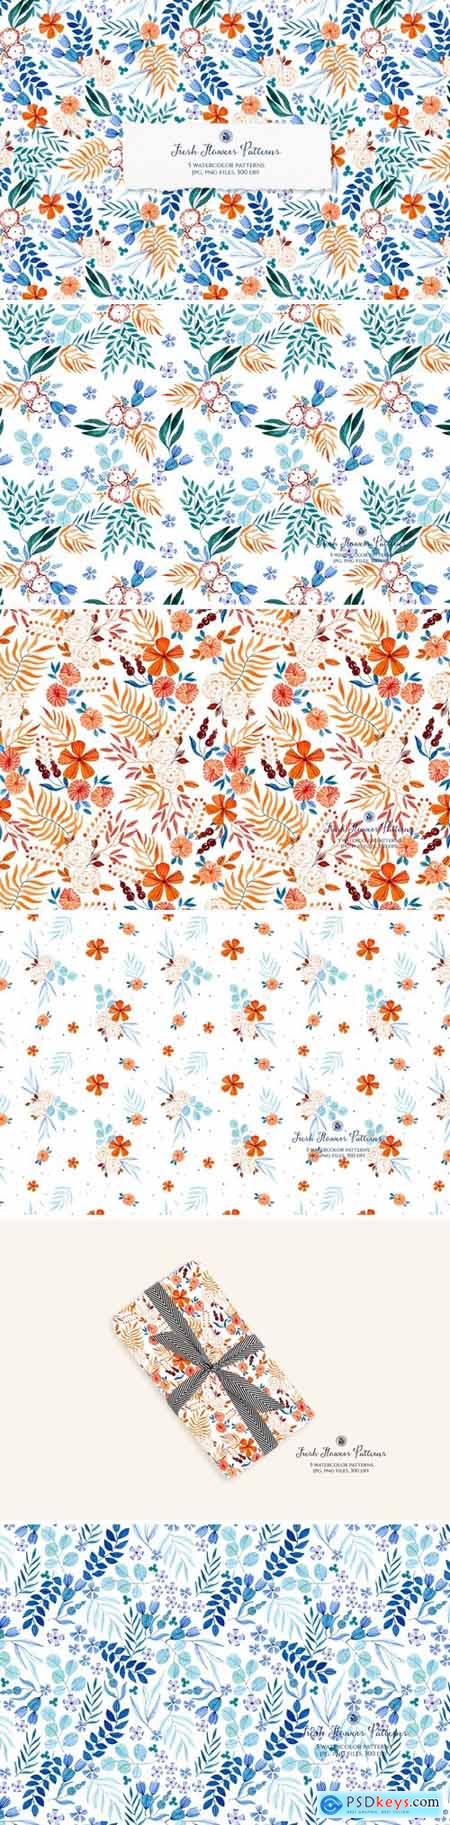 Fresh Flowers Watercolor Patterns Collection